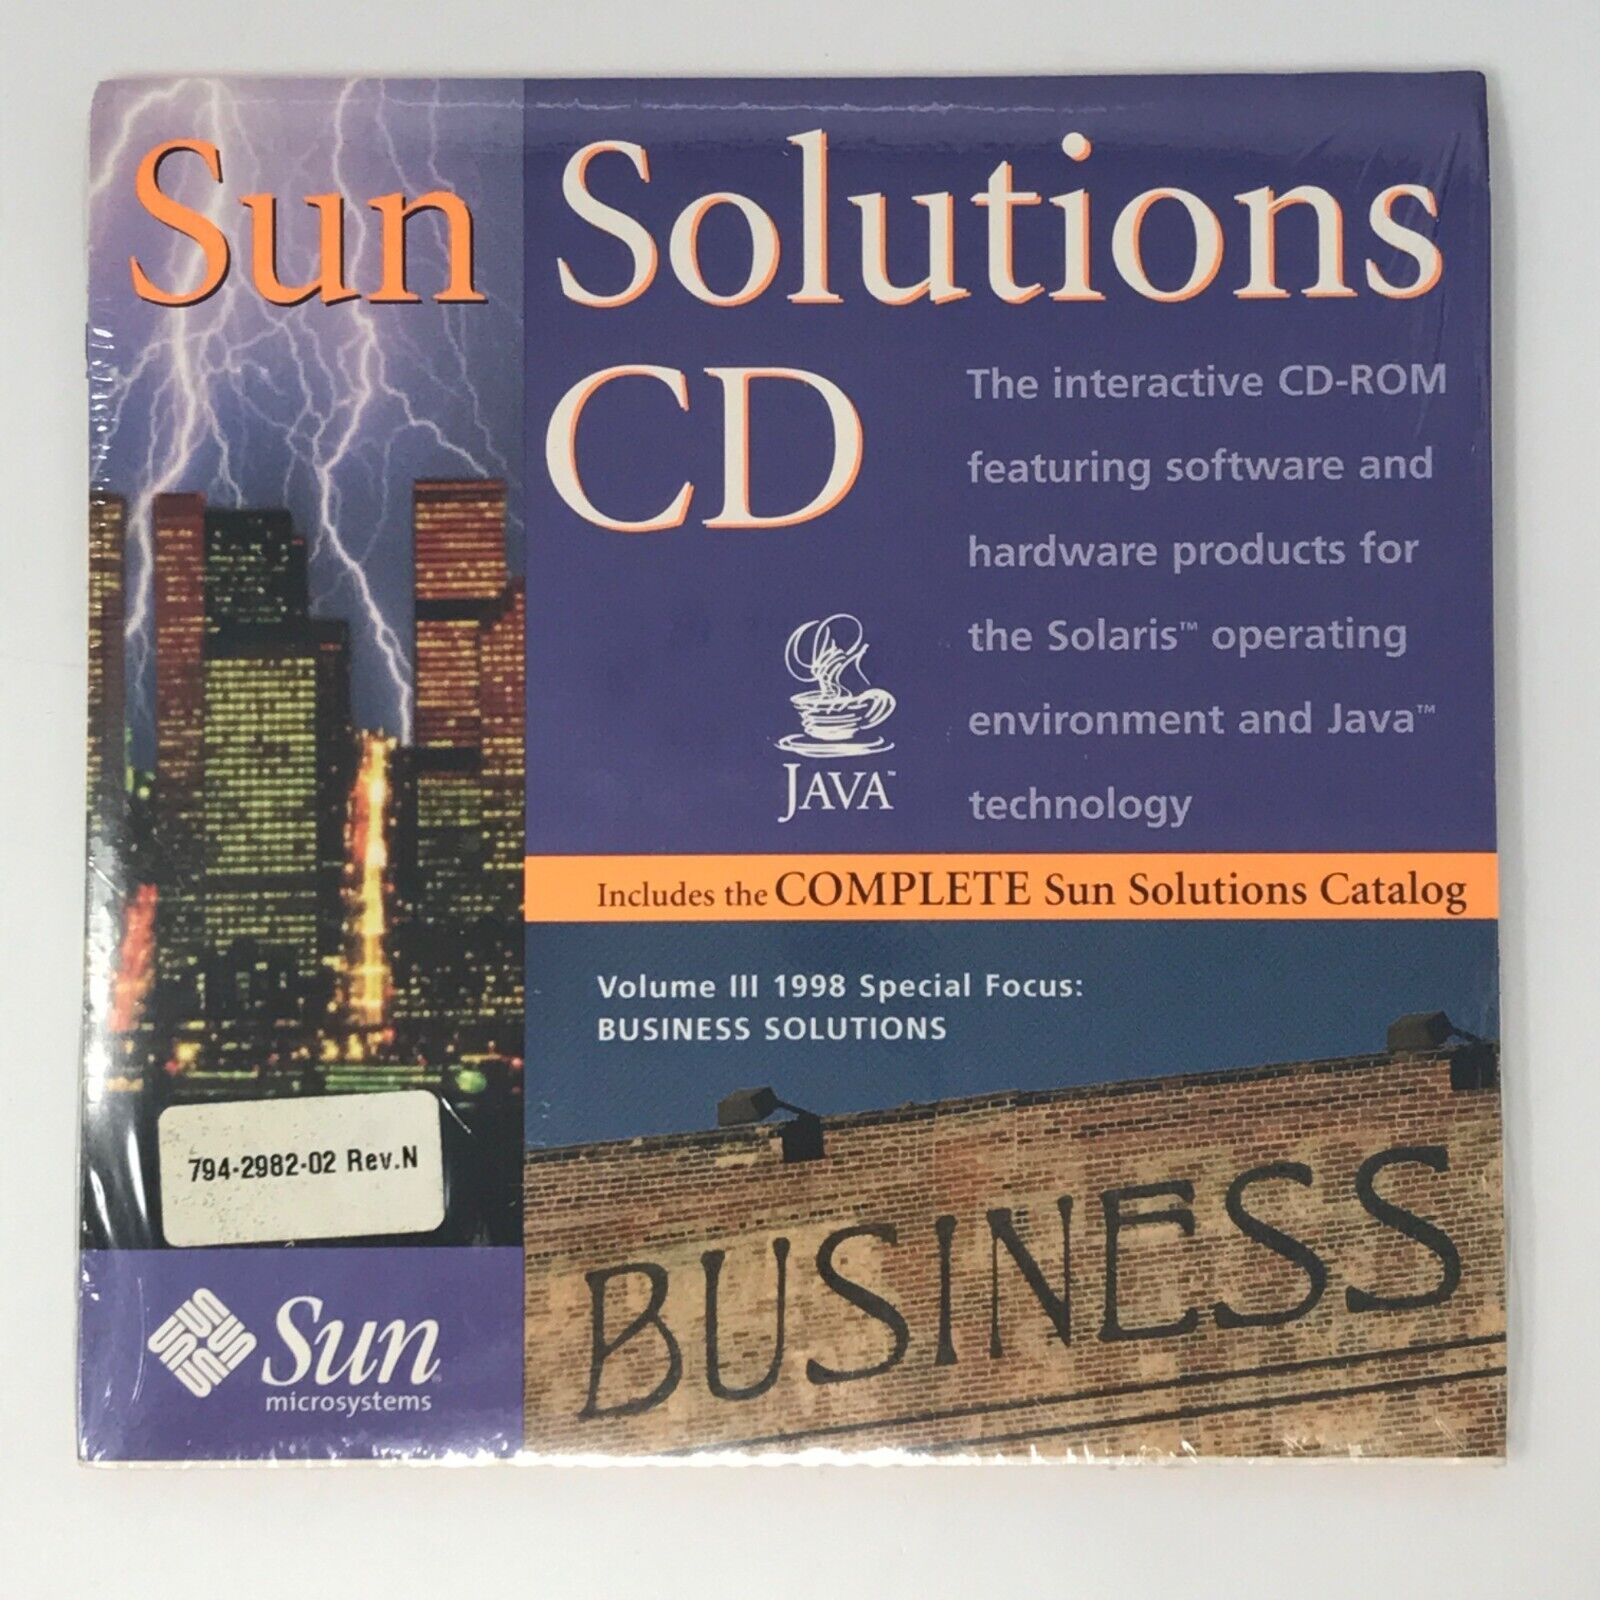 Sun Microsystems Sun Solutions CD Volume III 1998 Business Solutions New Sealed